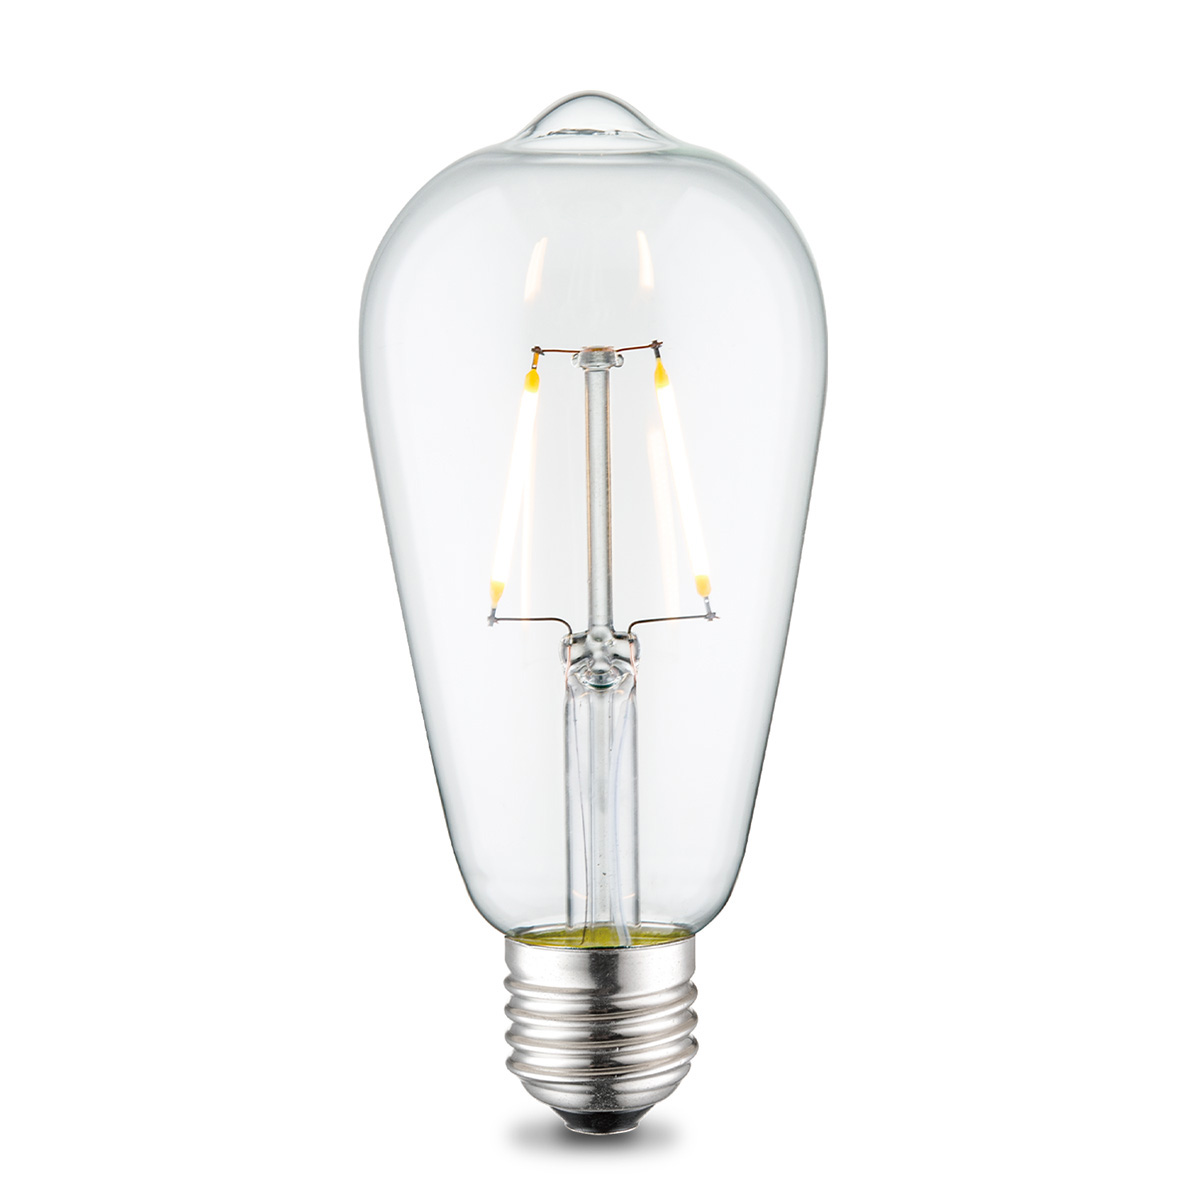 Tangla lighting - TLB-8001-02CL - LED Light Bulb Deco filament - ST64 2W clear - non dimmable - E27